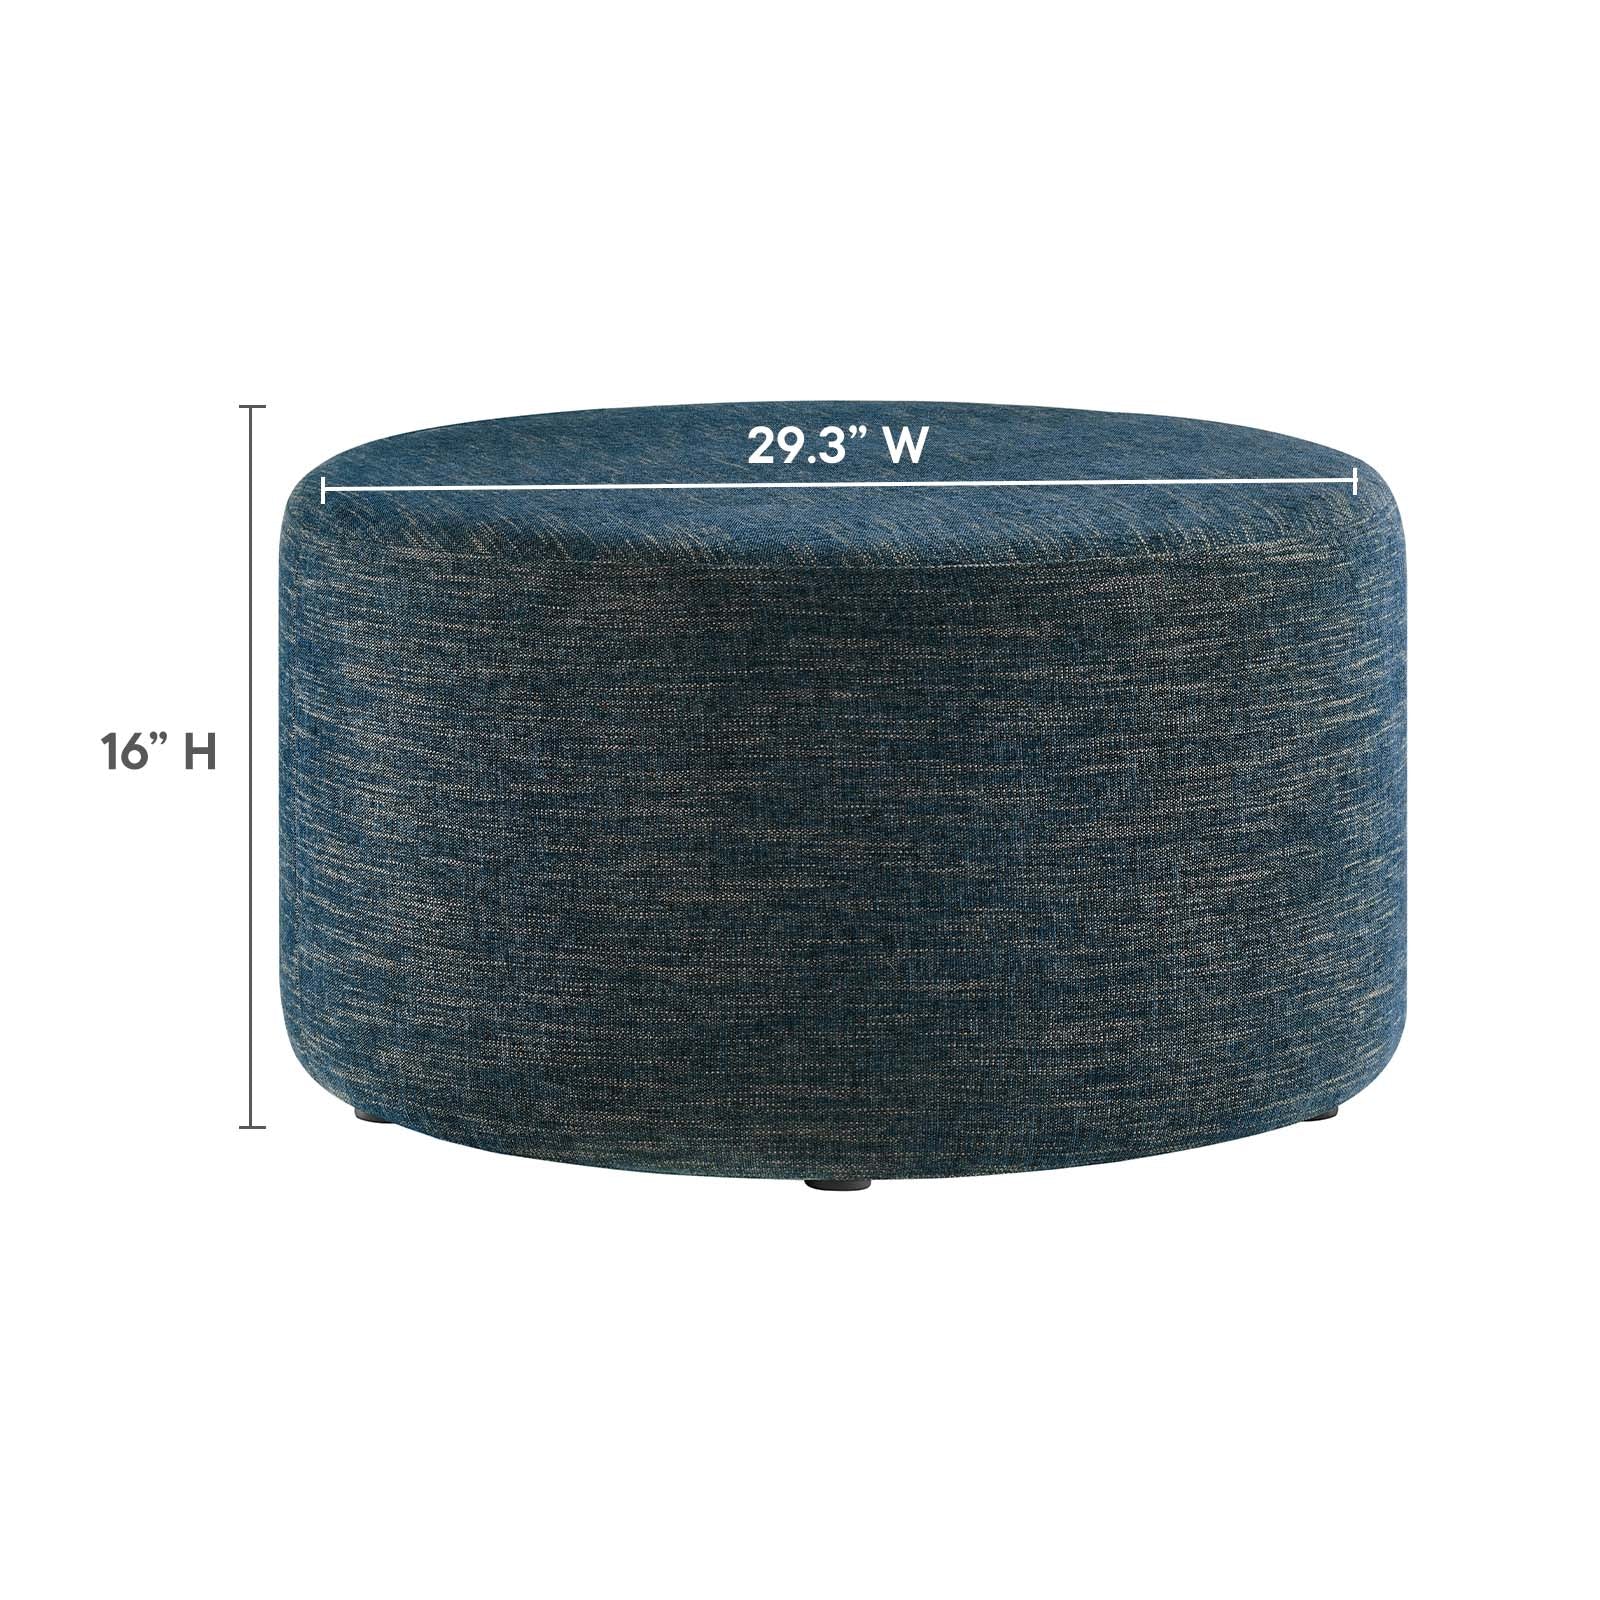 Callum Large 29" Round Woven Heathered Fabric Upholstered Ottoman - East Shore Modern Home Furnishings